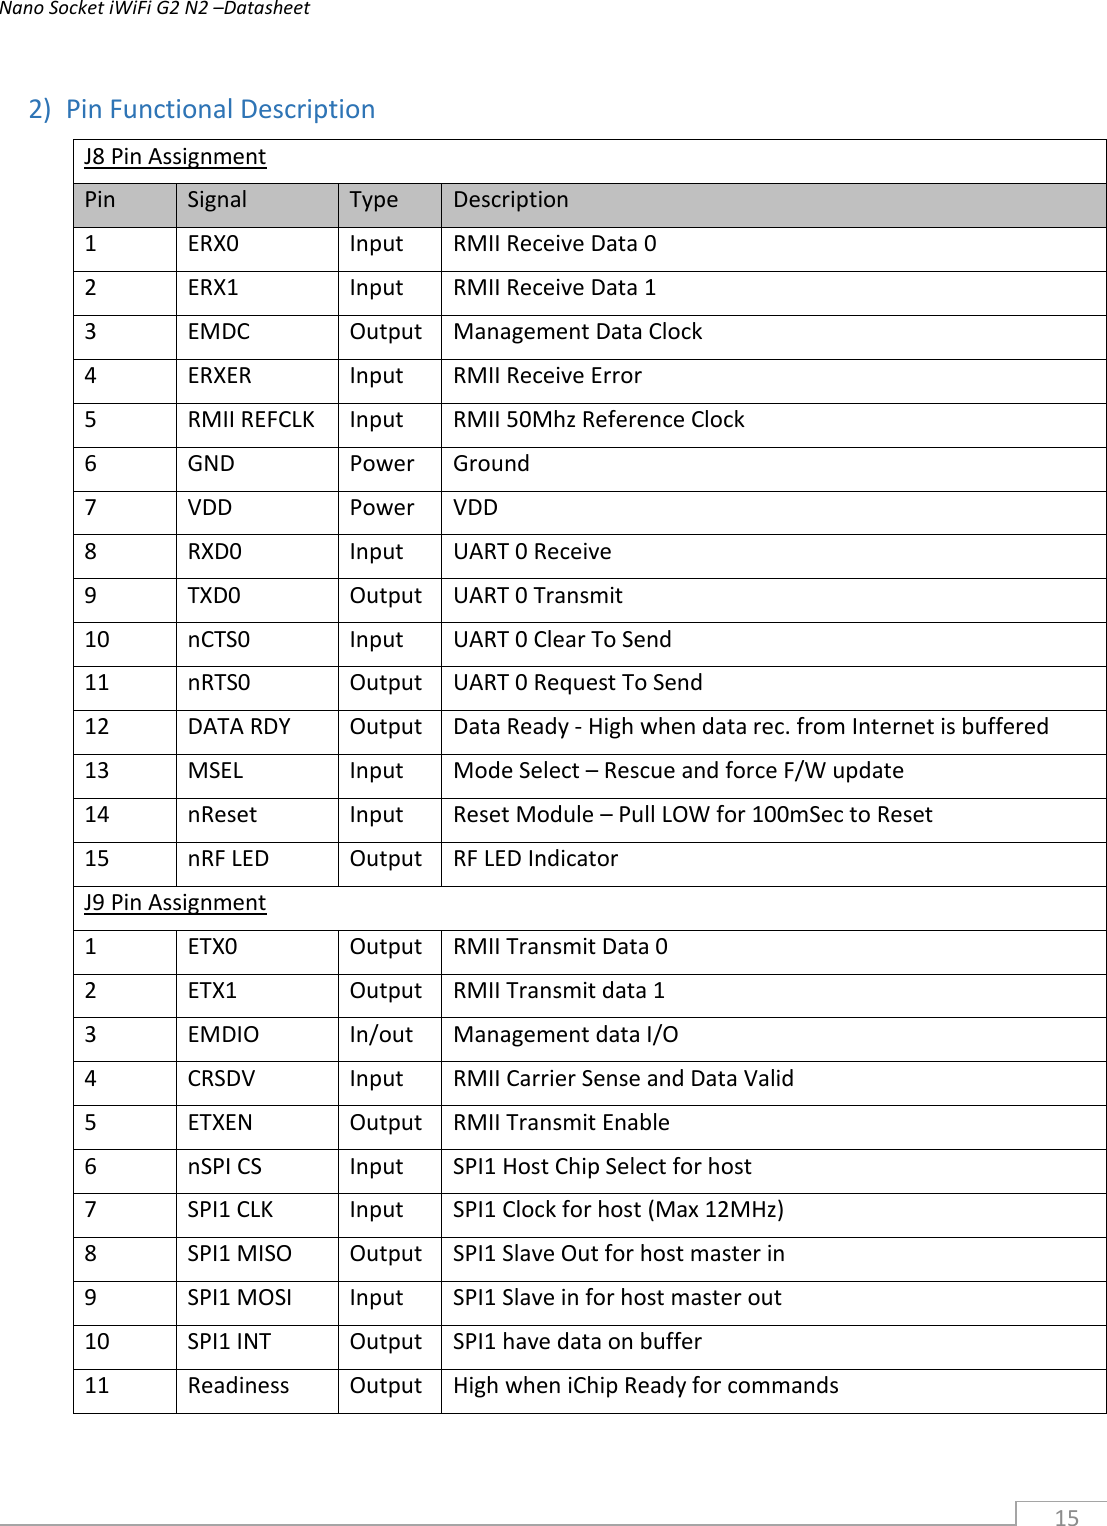 Nano Socket iWiFi G2 N2 –Datasheet 15 2) Pin Functional DescriptionJ8 Pin Assignment Pin Signal Type Description 1 ERX0 Input RMII Receive Data 0 2 ERX1 Input RMII Receive Data 1 3 EMDC Output Management Data Clock 4 ERXER Input RMII Receive Error 5 RMII REFCLK Input RMII 50Mhz Reference Clock 6 GND Power Ground 7 VDD Power VDD 8 RXD0 Input UART 0 Receive 9 TXD0 Output UART 0 Transmit 10 nCTS0 Input UART 0 Clear To Send 11 nRTS0 Output UART 0 Request To Send 12 DATA RDY Output Data Ready - High when data rec. from Internet is buffered 13 MSEL Input Mode Select – Rescue and force F/W update 14 nReset Input Reset Module – Pull LOW for 100mSec to Reset 15 nRF LED Output RF LED Indicator J9 Pin Assignment 1 ETX0 Output RMII Transmit Data 0 2 ETX1 Output RMII Transmit data 1 3 EMDIO In/out Management data I/O 4 CRSDV Input RMII Carrier Sense and Data Valid 5 ETXEN Output RMII Transmit Enable 6 nSPI CS Input SPI1 Host Chip Select for host 7 SPI1 CLK Input SPI1 Clock for host (Max 12MHz) 8 SPI1 MISO Output SPI1 Slave Out for host master in 9 SPI1 MOSI Input SPI1 Slave in for host master out 10 SPI1 INT Output SPI1 have data on buffer 11 Readiness Output High when iChip Ready for commands 